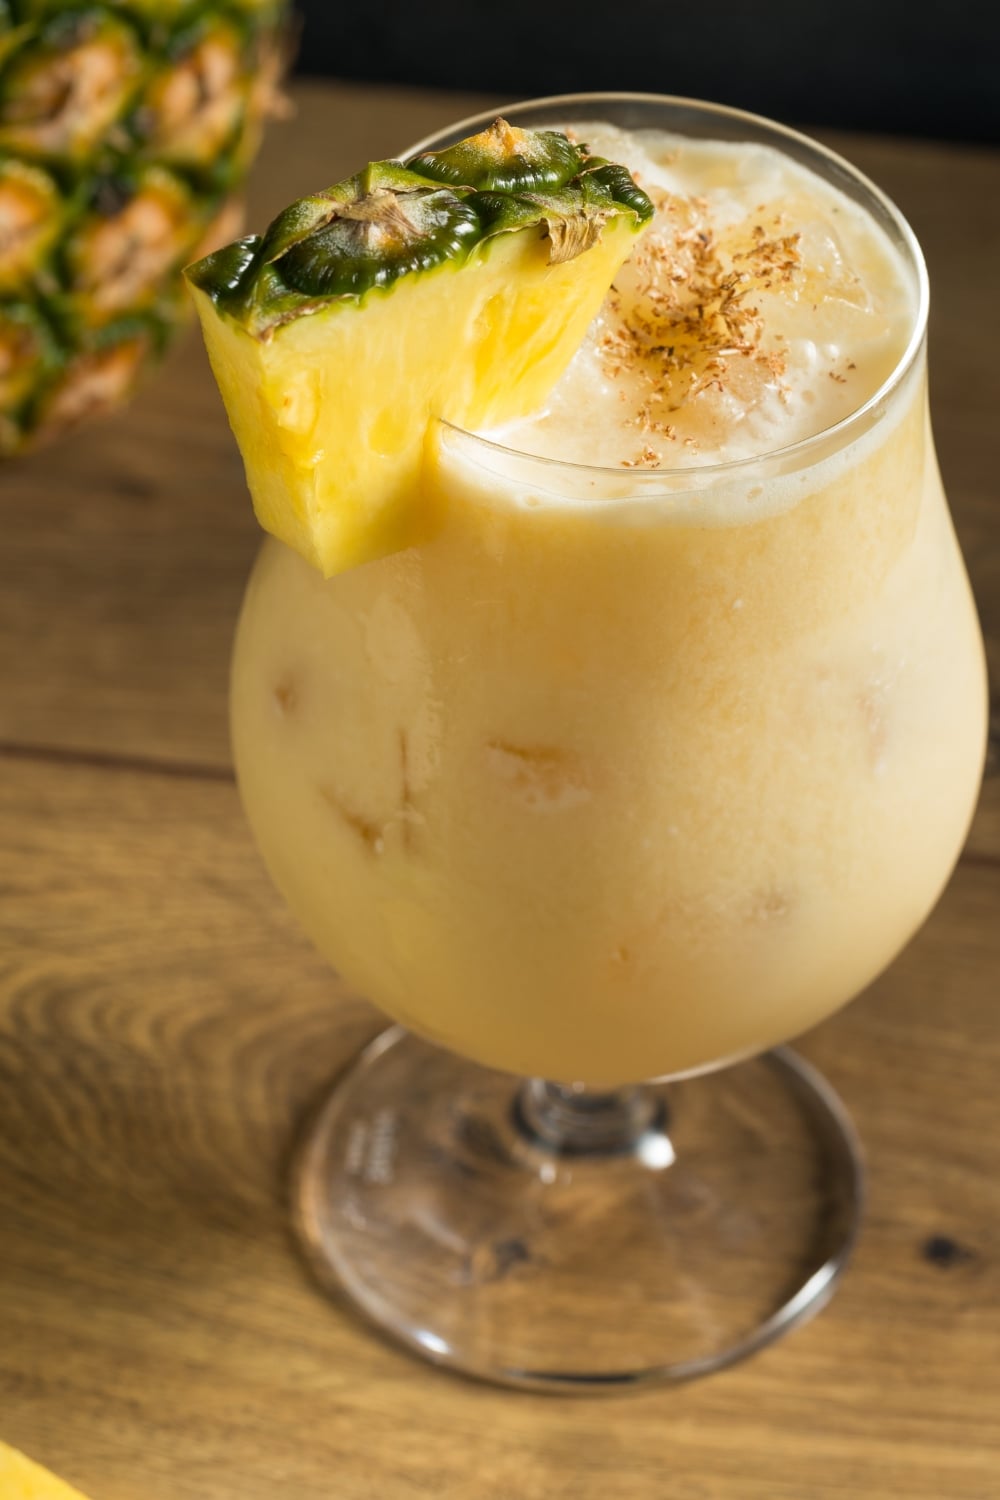 A glass of Pineapple Cocktail with a pineapple garnish on a wooden table